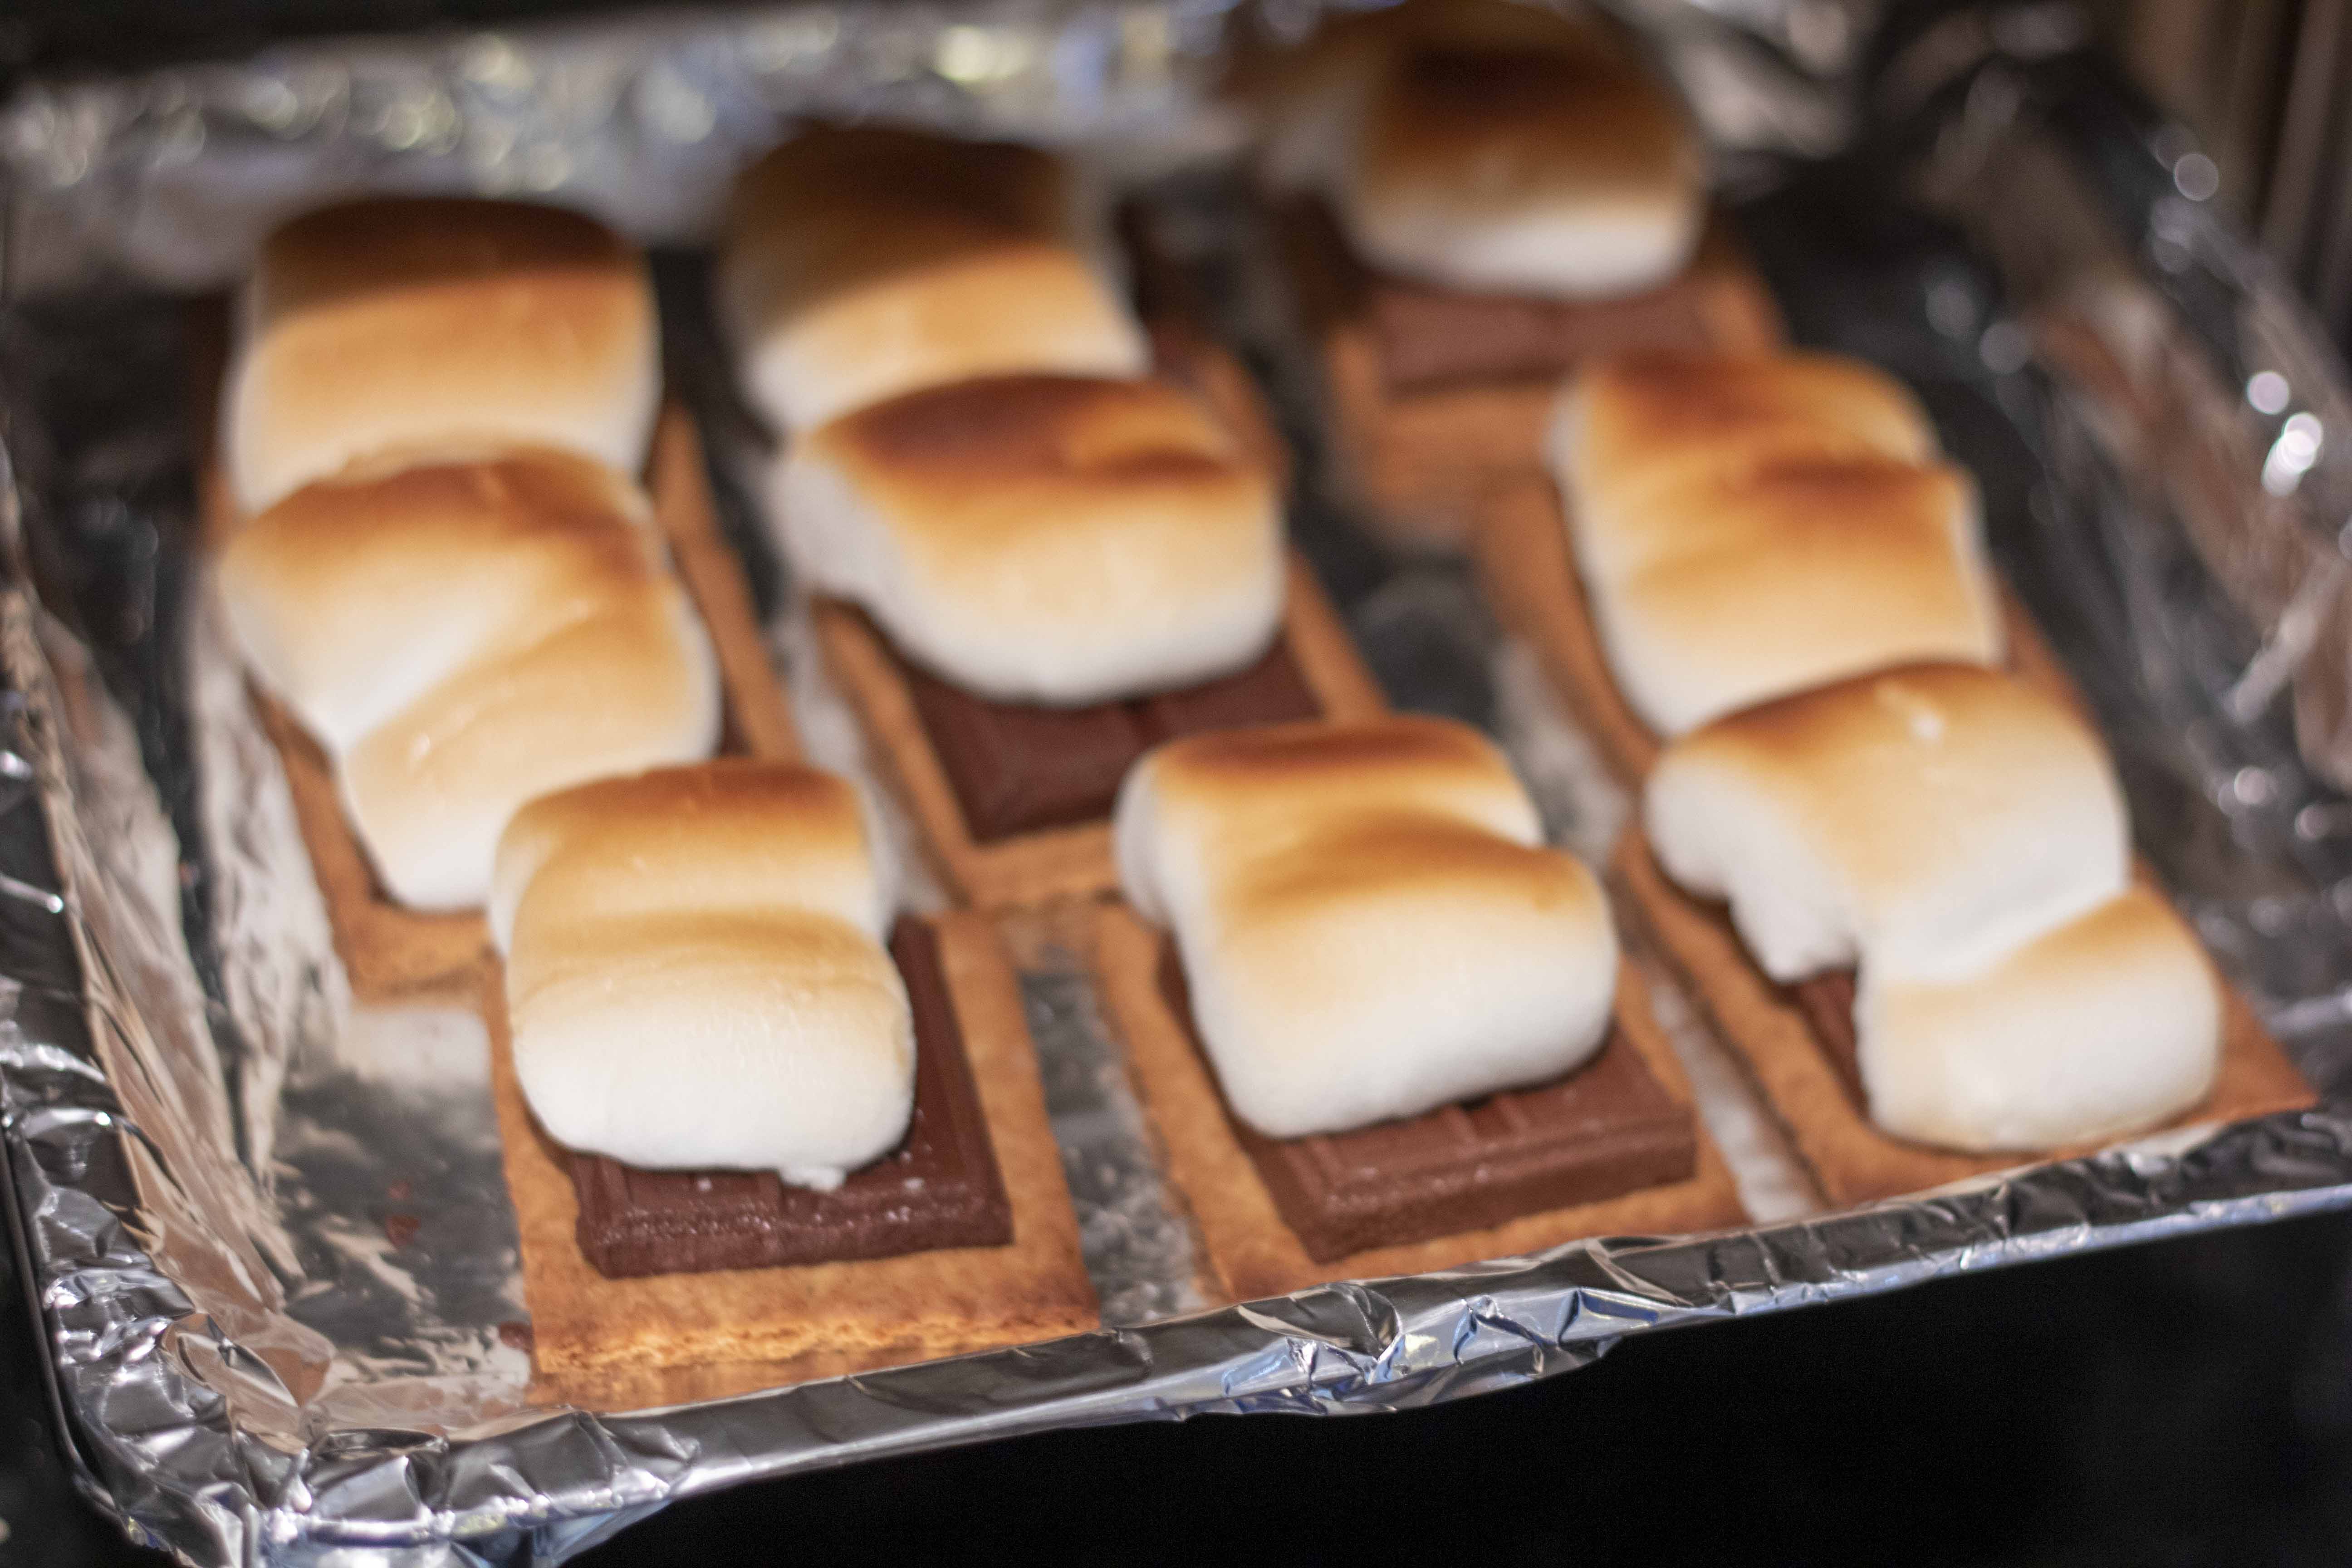 Freshly toasted marshmallows from the oven for Sheet Pan S'mores @ bestwithchocolate.com